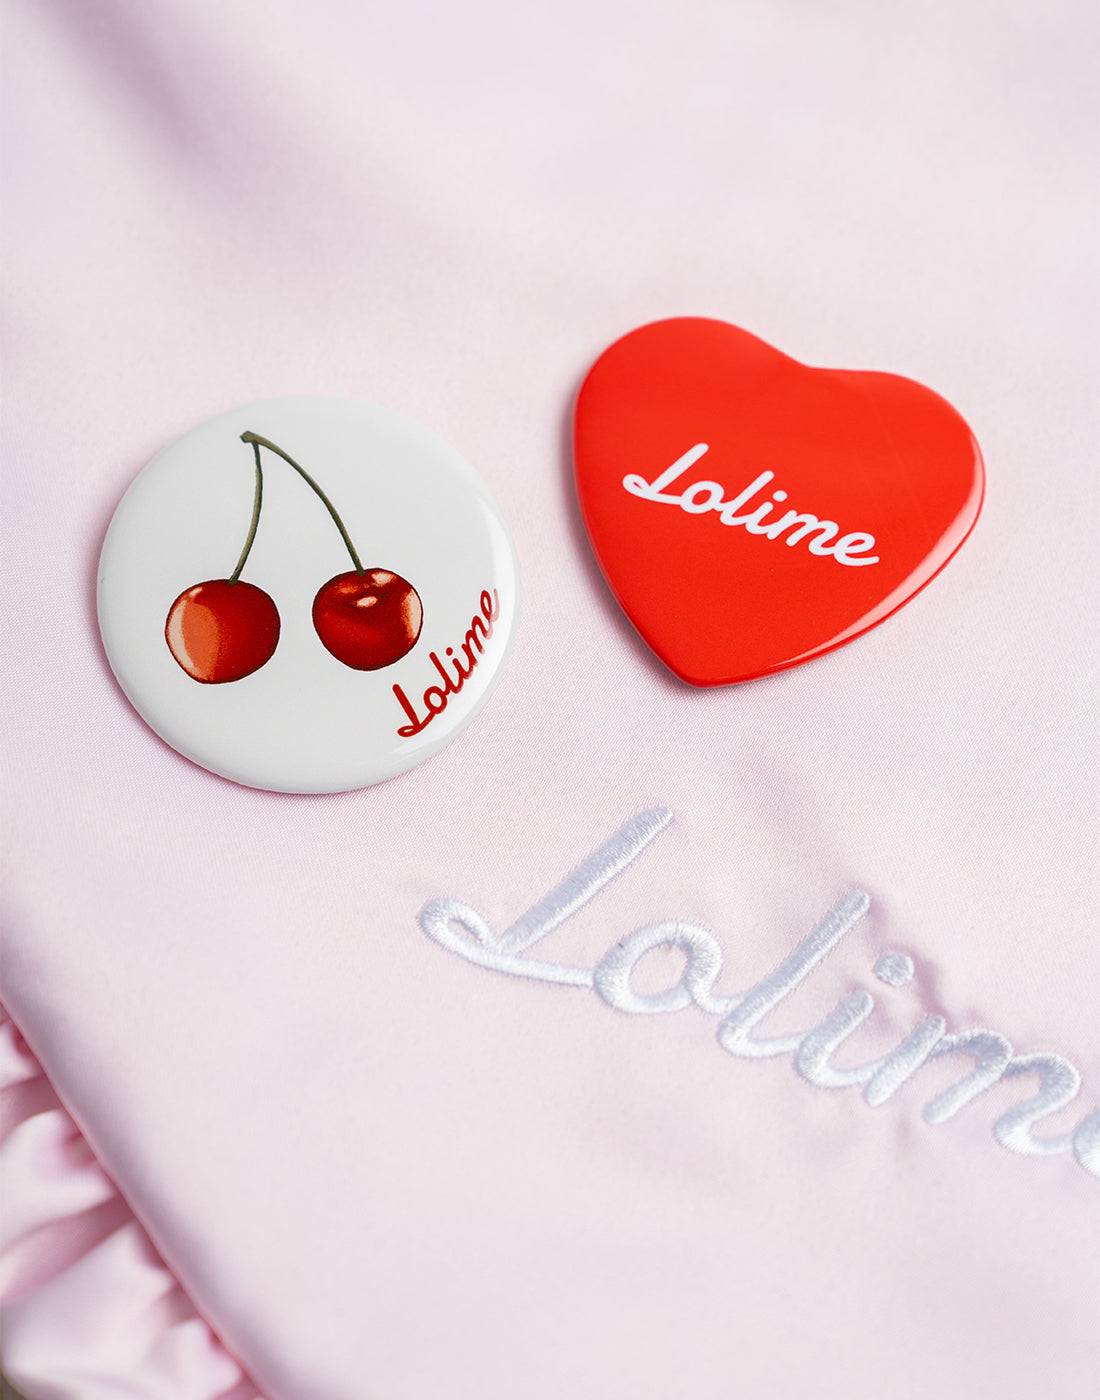 Lolime オリジナル缶バッジ2個セット 2023Summer／ Lolime